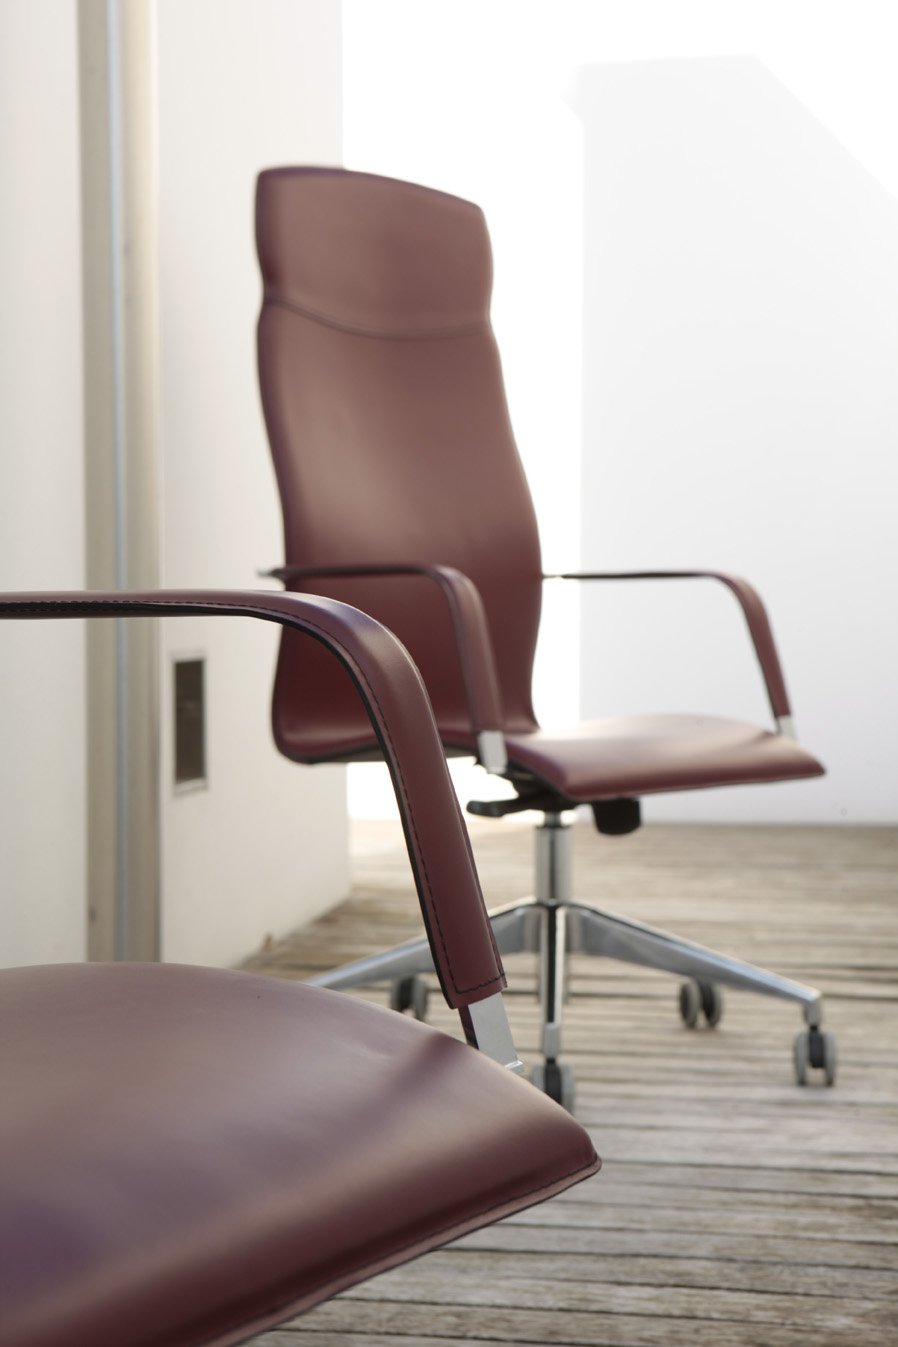 Wize_OWize Office chairs Bolzano directiestoelffice_Bolzano_directiestoel_projectmeubilair.nl